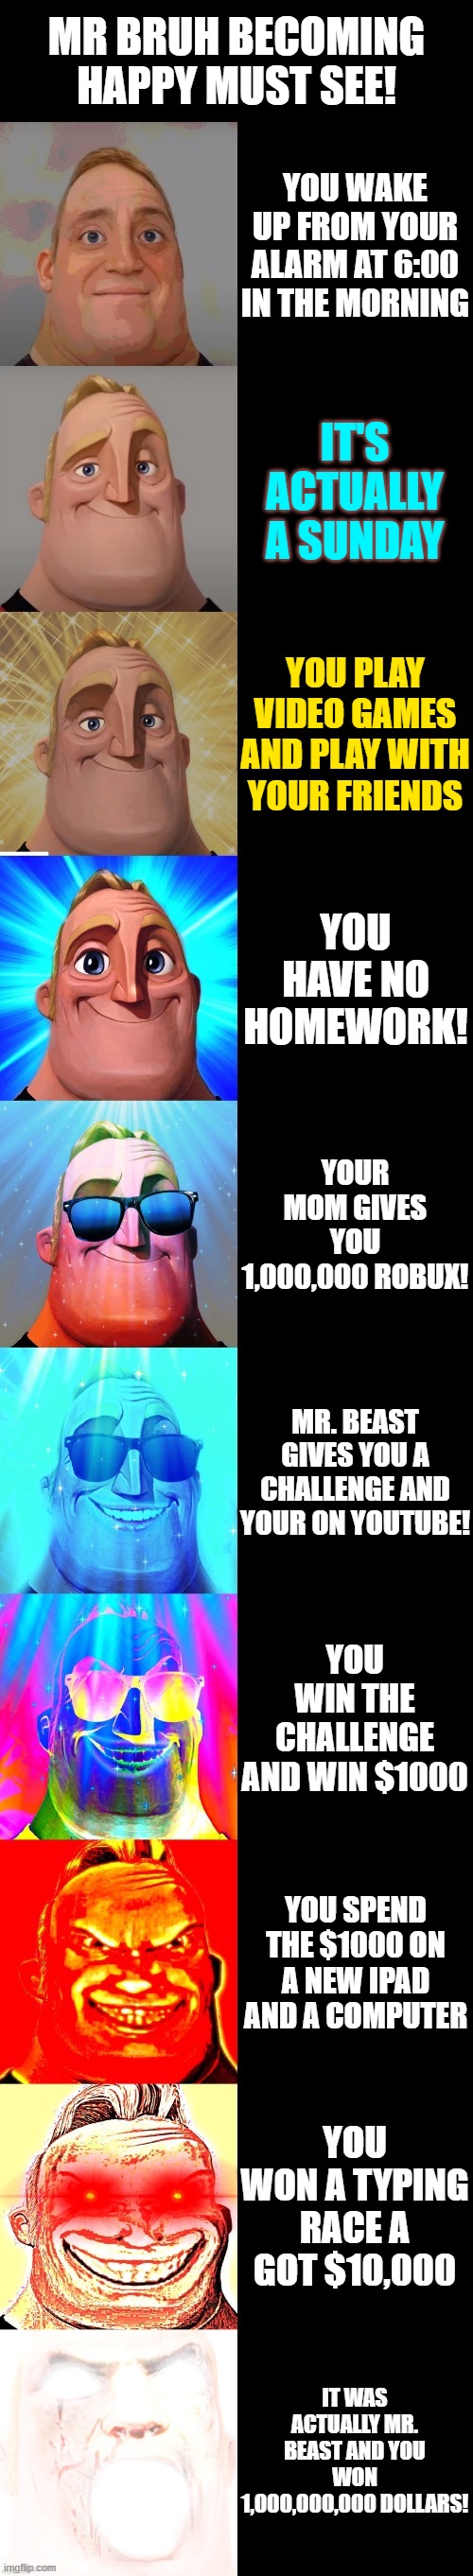 mr incredible becoming canny | MR BRUH BECOMING HAPPY MUST SEE! YOU WAKE UP FROM YOUR ALARM AT 6:00 IN THE MORNING; IT'S ACTUALLY A SUNDAY; YOU PLAY VIDEO GAMES AND PLAY WITH YOUR FRIENDS; YOU HAVE NO HOMEWORK! YOUR MOM GIVES YOU 1,000,000 ROBUX! MR. BEAST GIVES YOU A CHALLENGE AND YOUR ON YOUTUBE! YOU WIN THE CHALLENGE AND WIN $1000; YOU SPEND THE $1000 ON A NEW IPAD AND A COMPUTER; YOU WON A TYPING RACE A GOT $10,000; IT WAS ACTUALLY MR. BEAST AND YOU WON 1,000,000,000 DOLLARS! | image tagged in mr incredible becoming canny | made w/ Imgflip meme maker